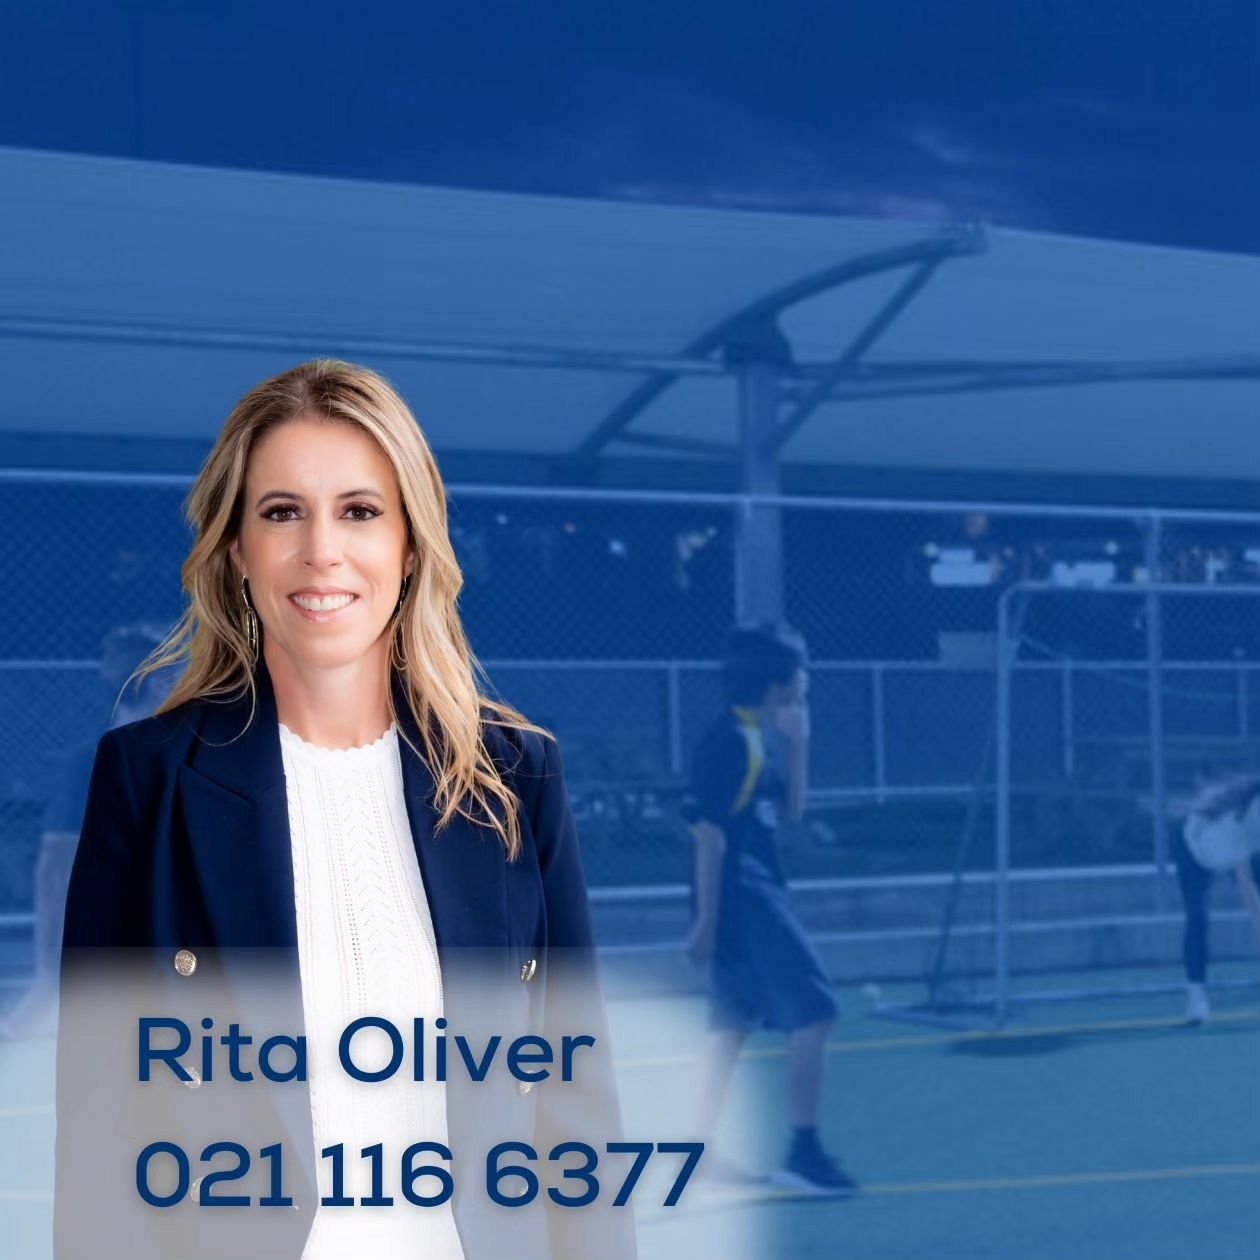 We are pleased to announce the exciting news of our new platinum sponsors @ritaoliver_realestate and @stephen_reed_real_estate_ !

Two phenomenal real estate agents from @barfootthompson that are happy to support Footy Night Club for the year and see